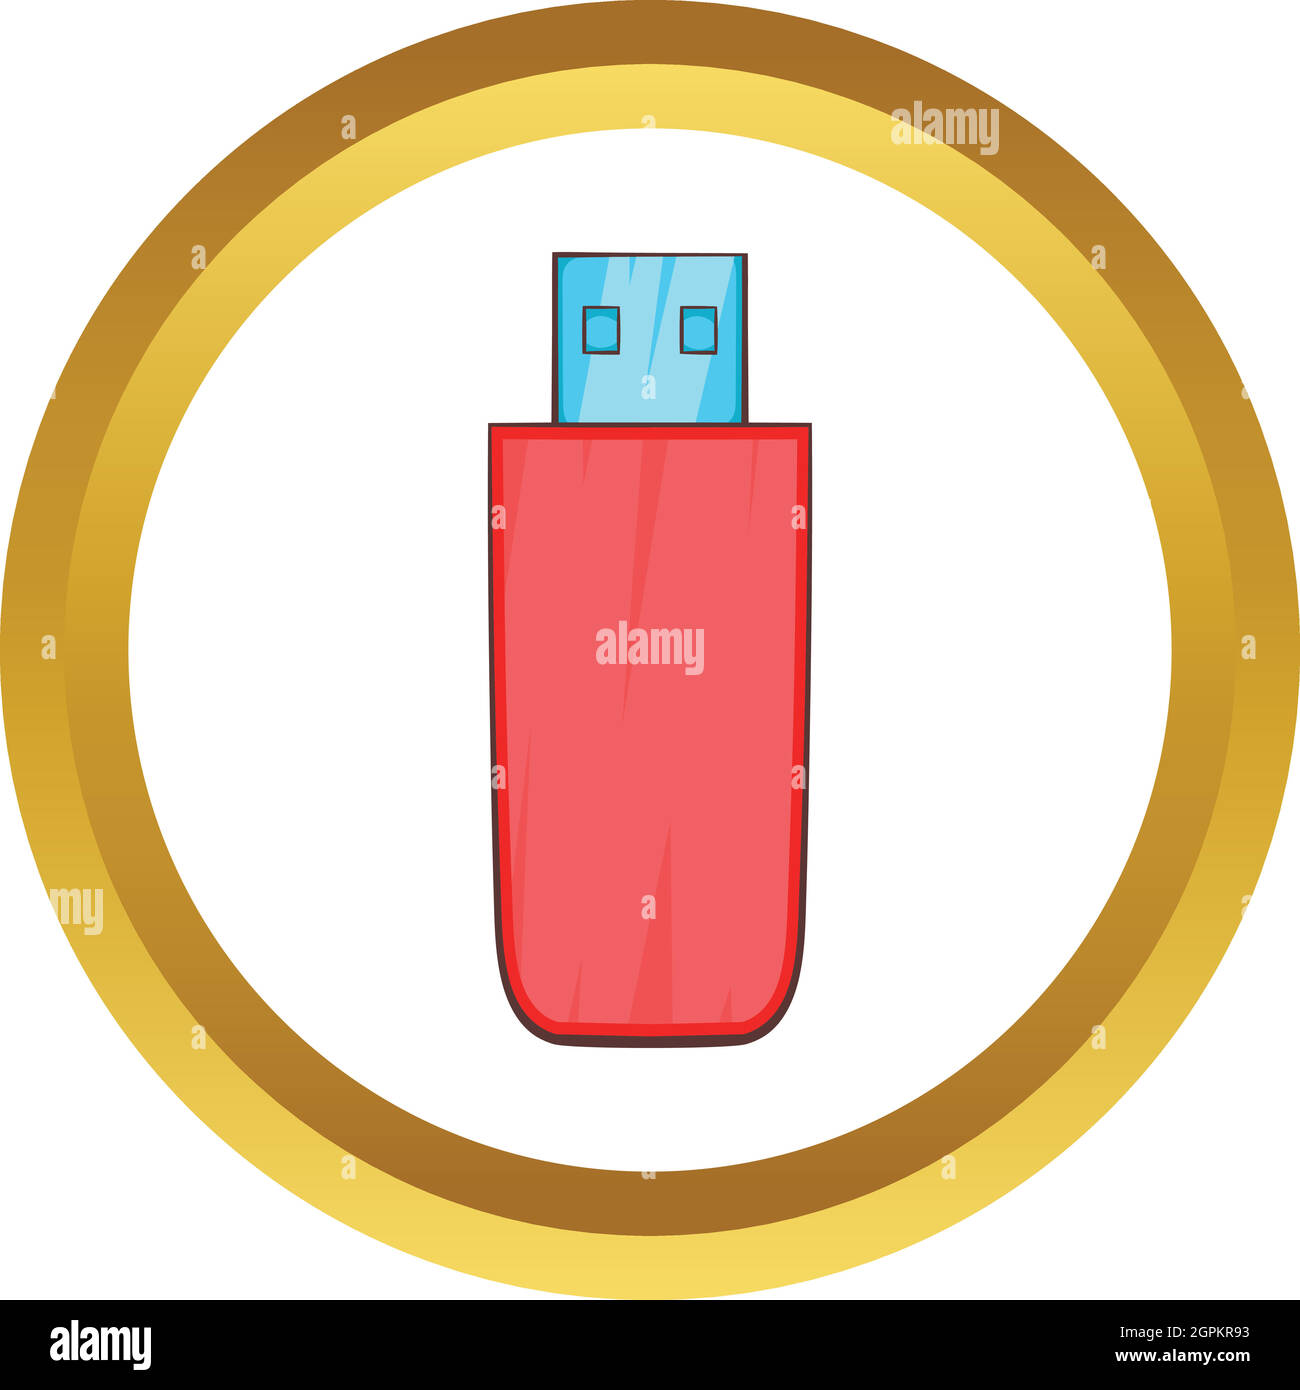 Red USB flash drive vector icon Stock Vector